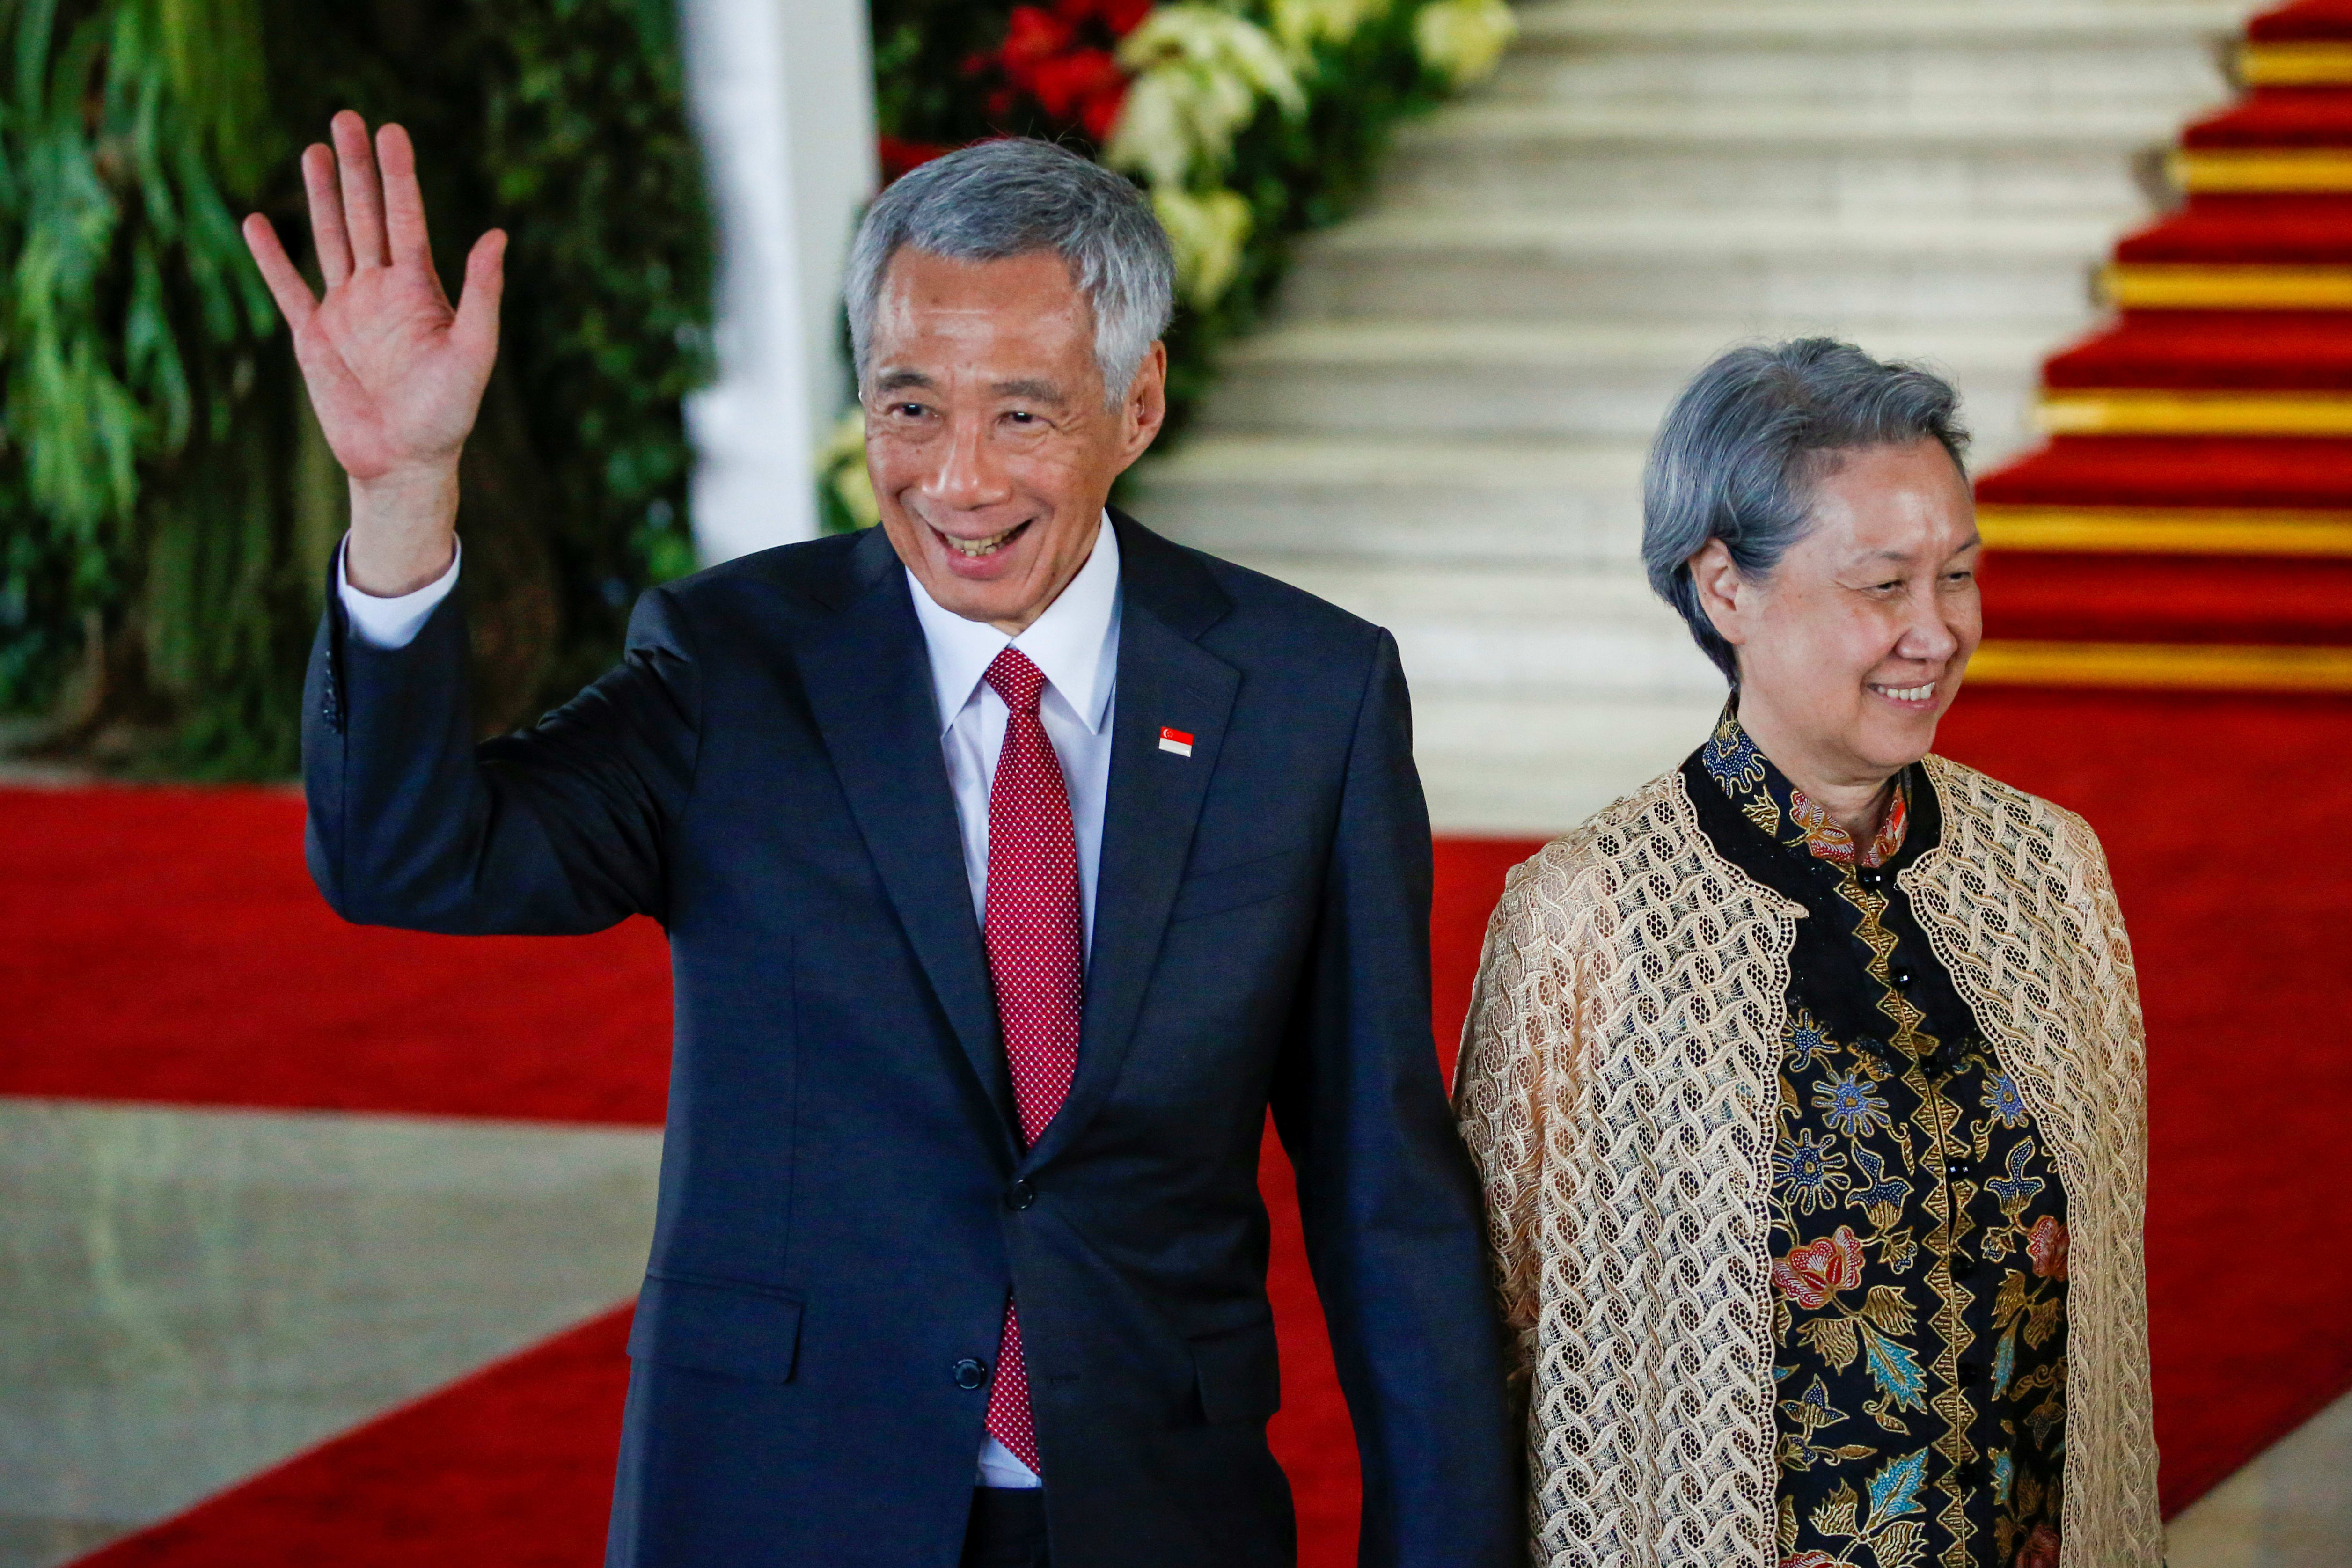 Prime Minister Lee Hsien Loong and his wife Mdm Ho Ching will be in Johor at the invitation of Sultan Ibrahim Ibni Almarhum Sultan Iskandar, and the award investiture ceremony will be held at the Istana Besar.